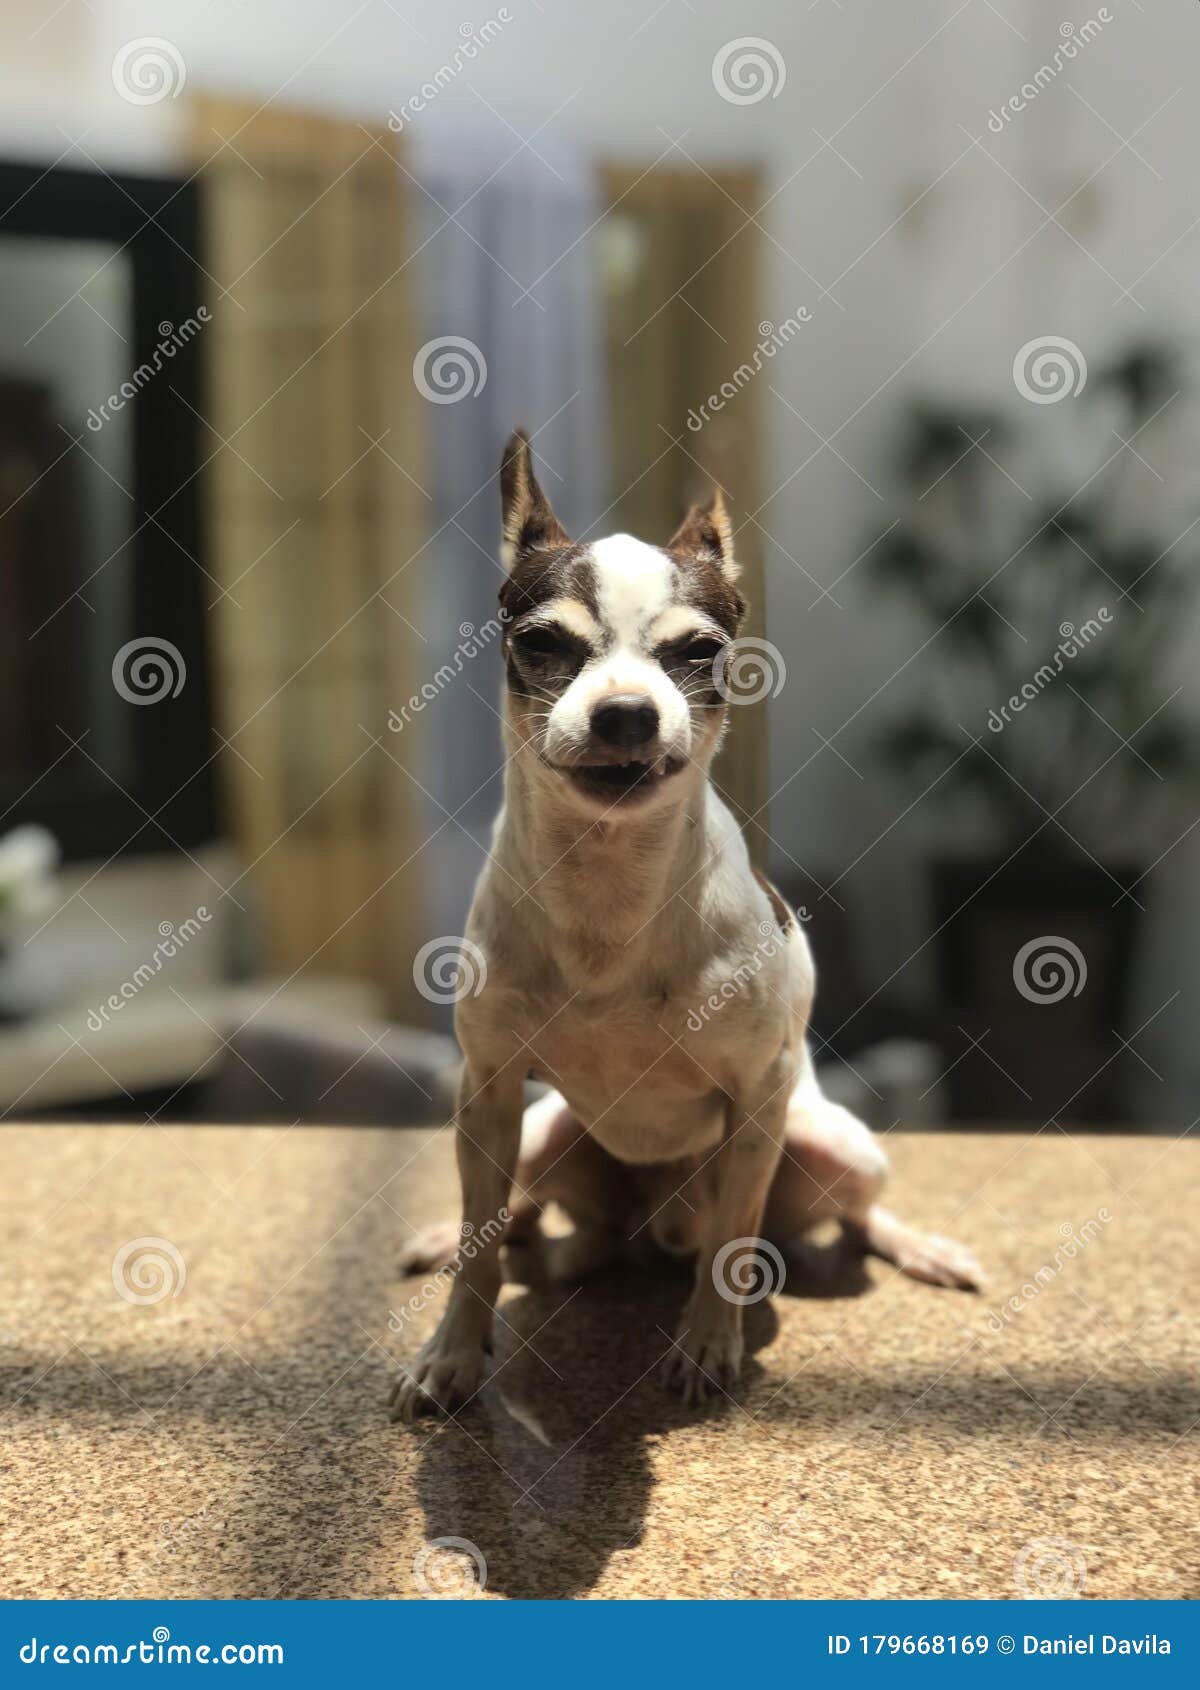 Funny chihuahua stock image. Image of making, faces